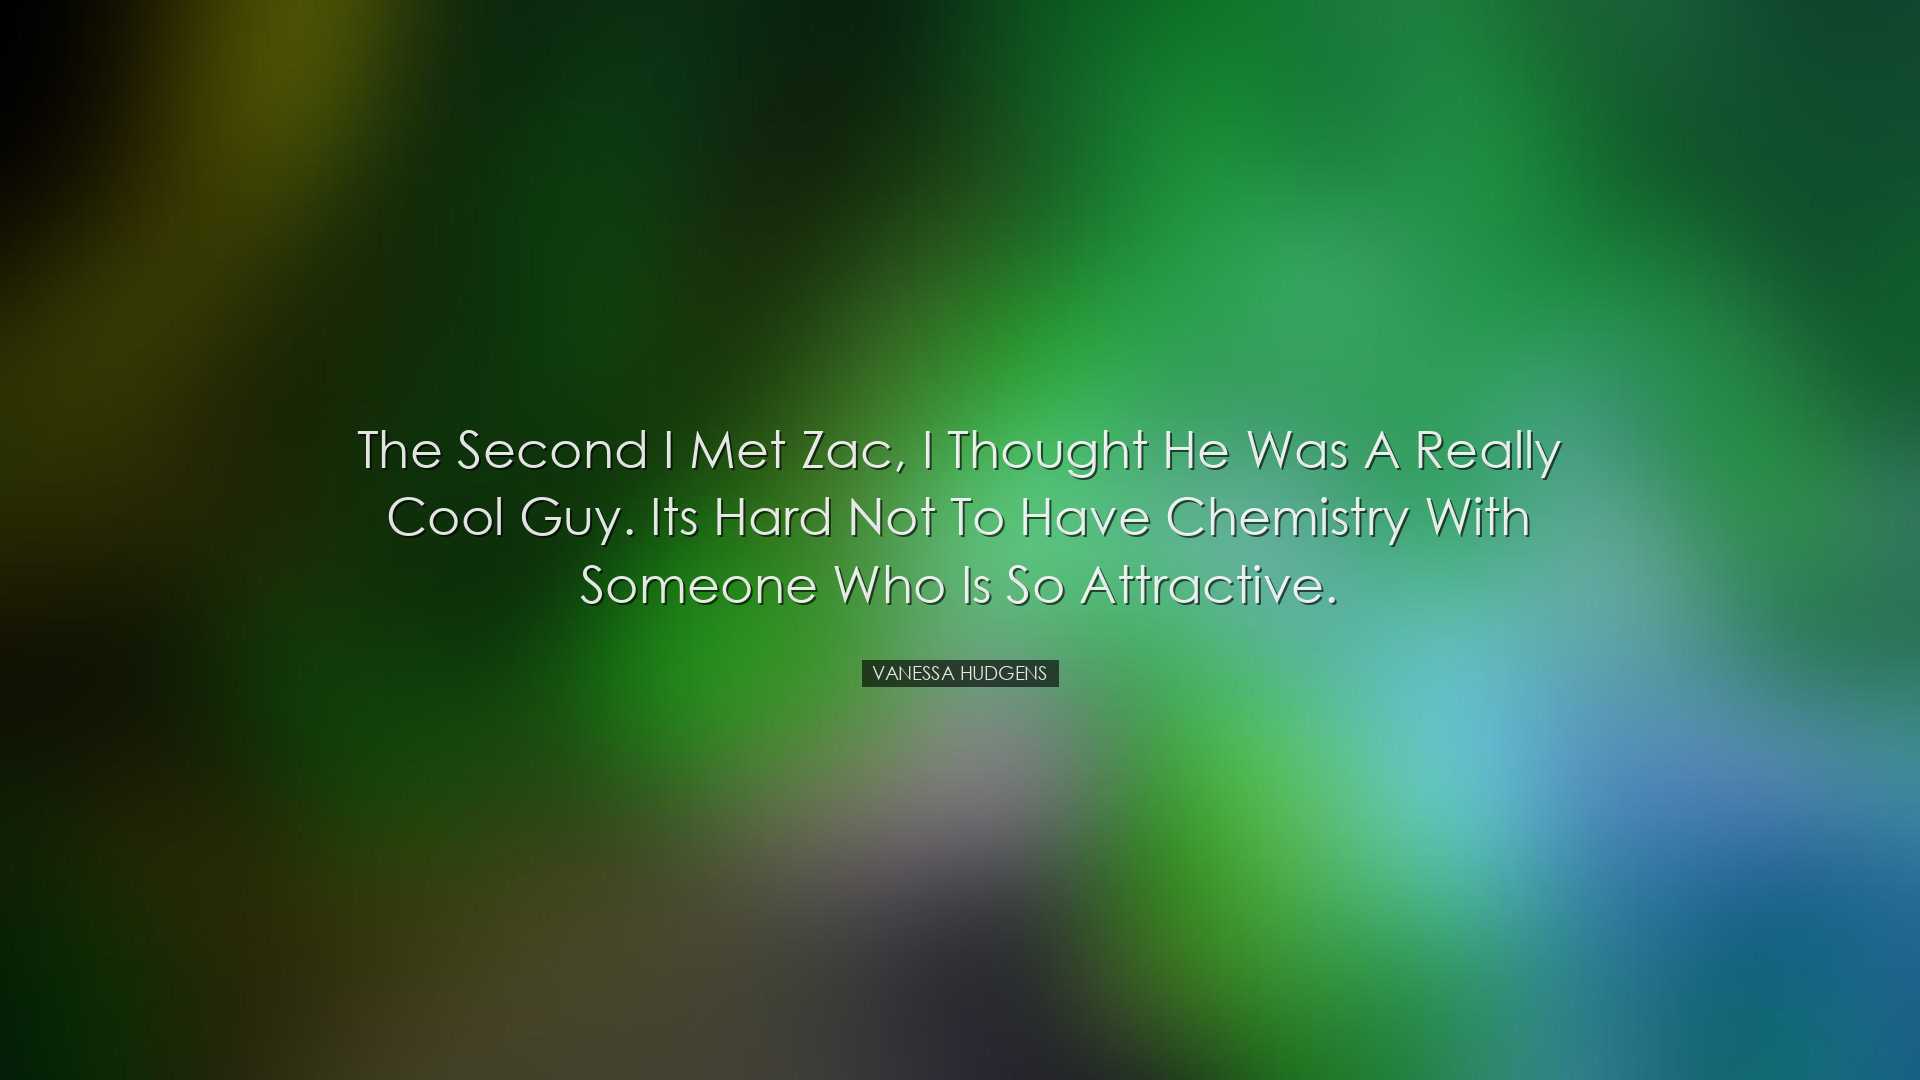 The second I met Zac, I thought he was a really cool guy. Its hard